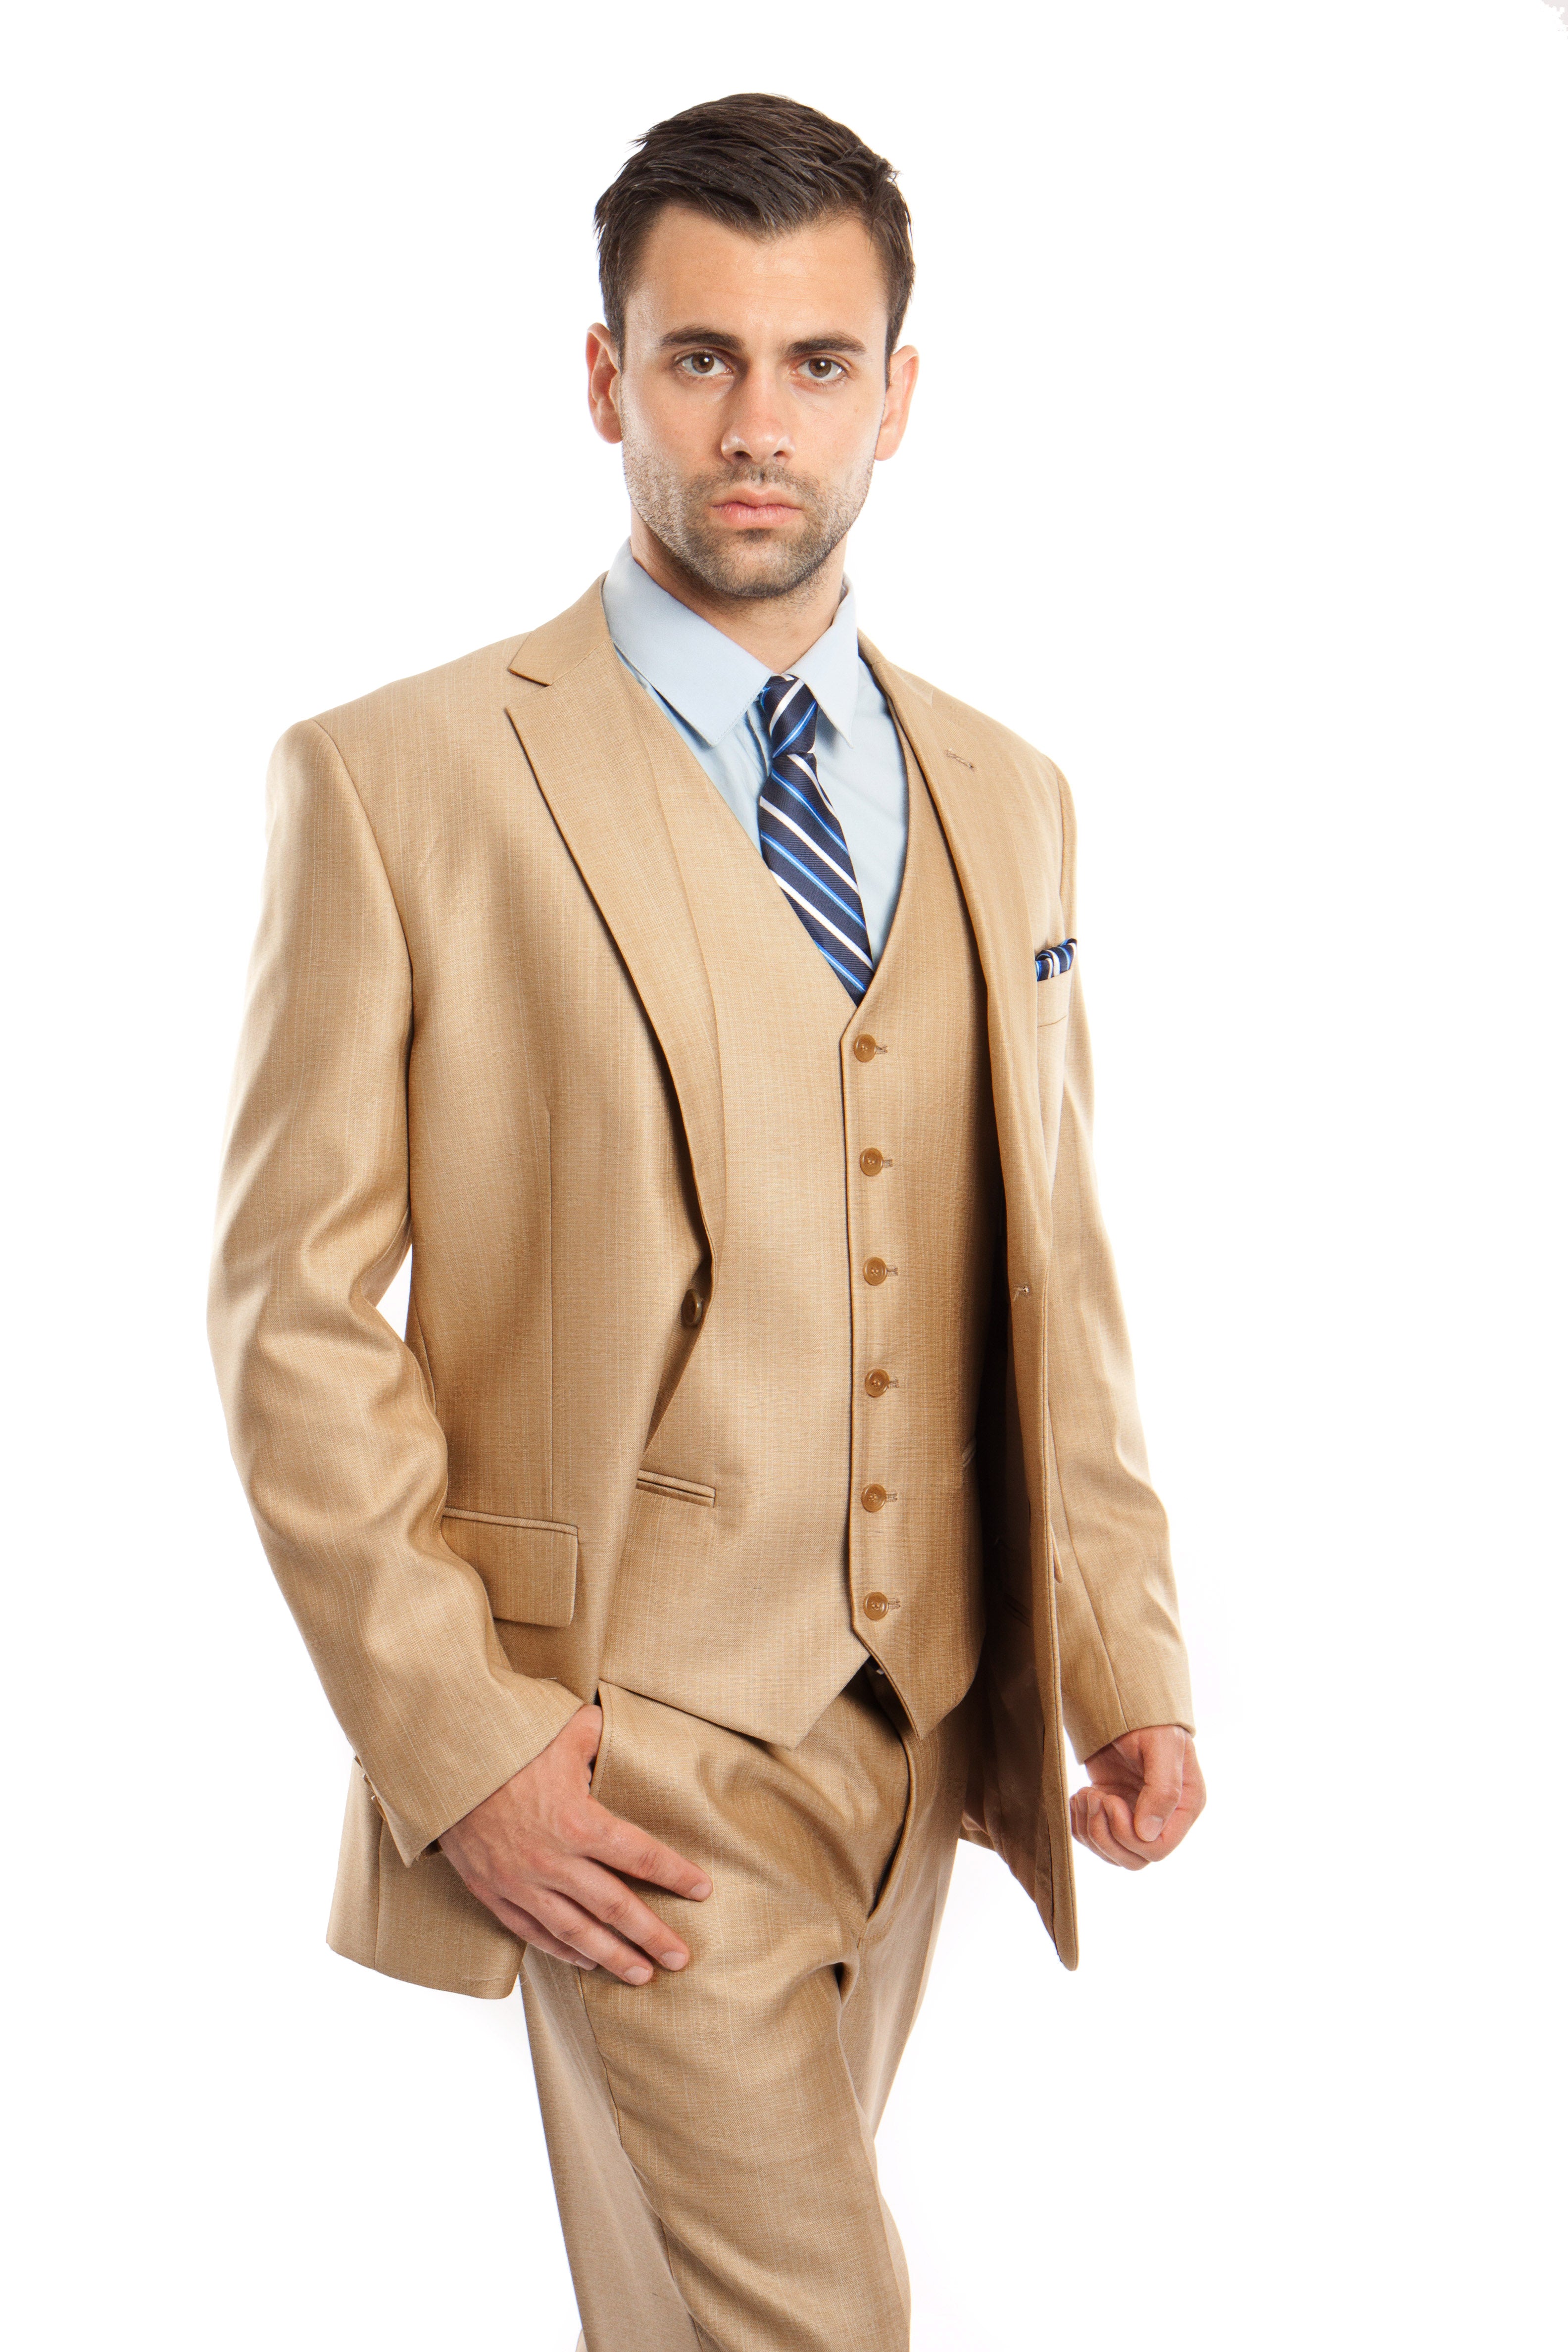 Wheat Solid Shiny Sharkskin 3-PC Regular Modern Fit Suits For Men